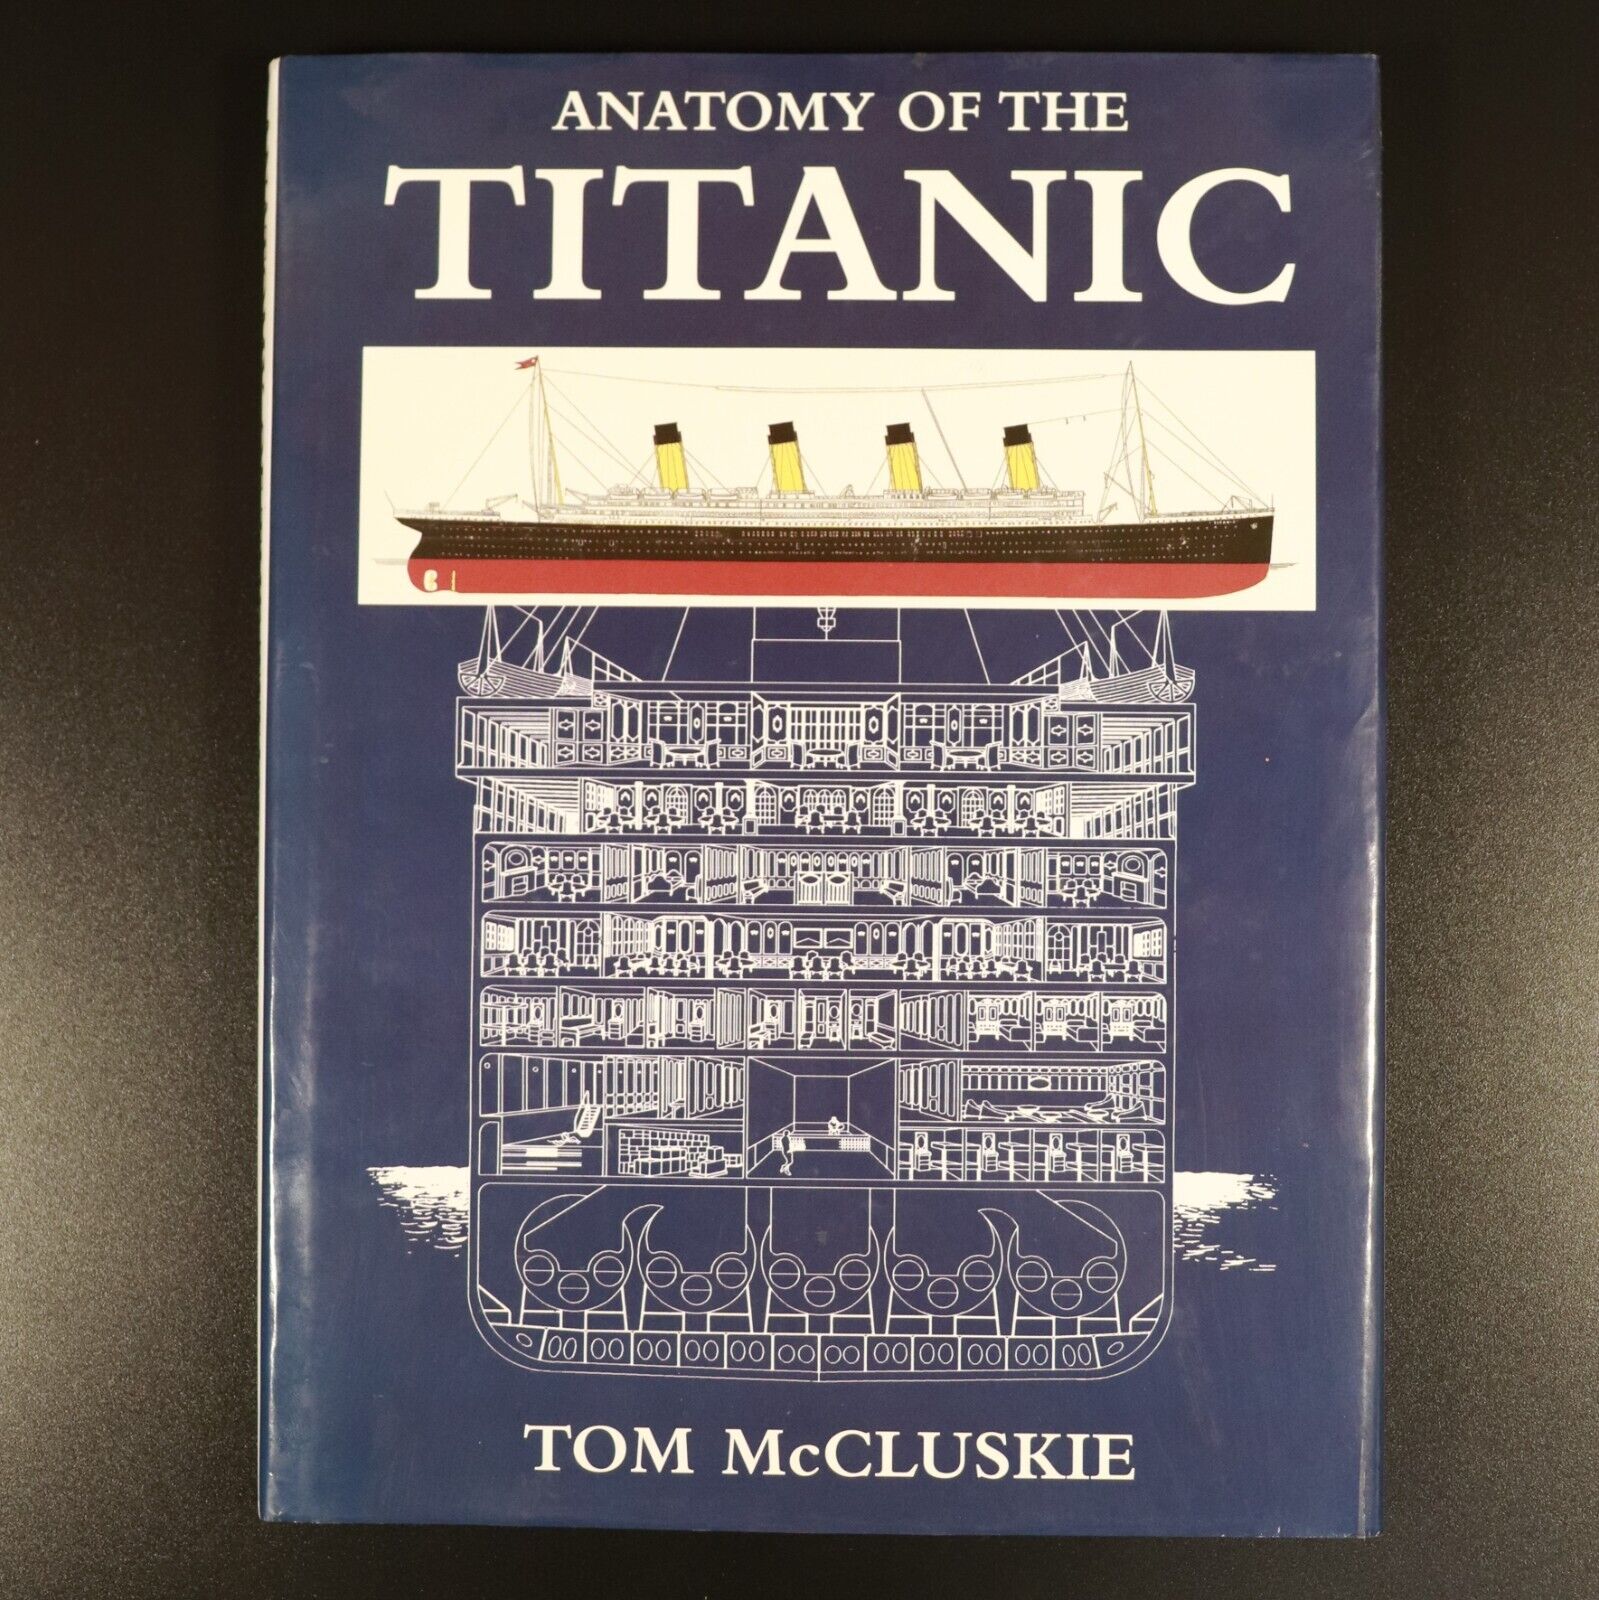 1998 Anatomy Of The Titanic by T. McCluskie Maritime History Book